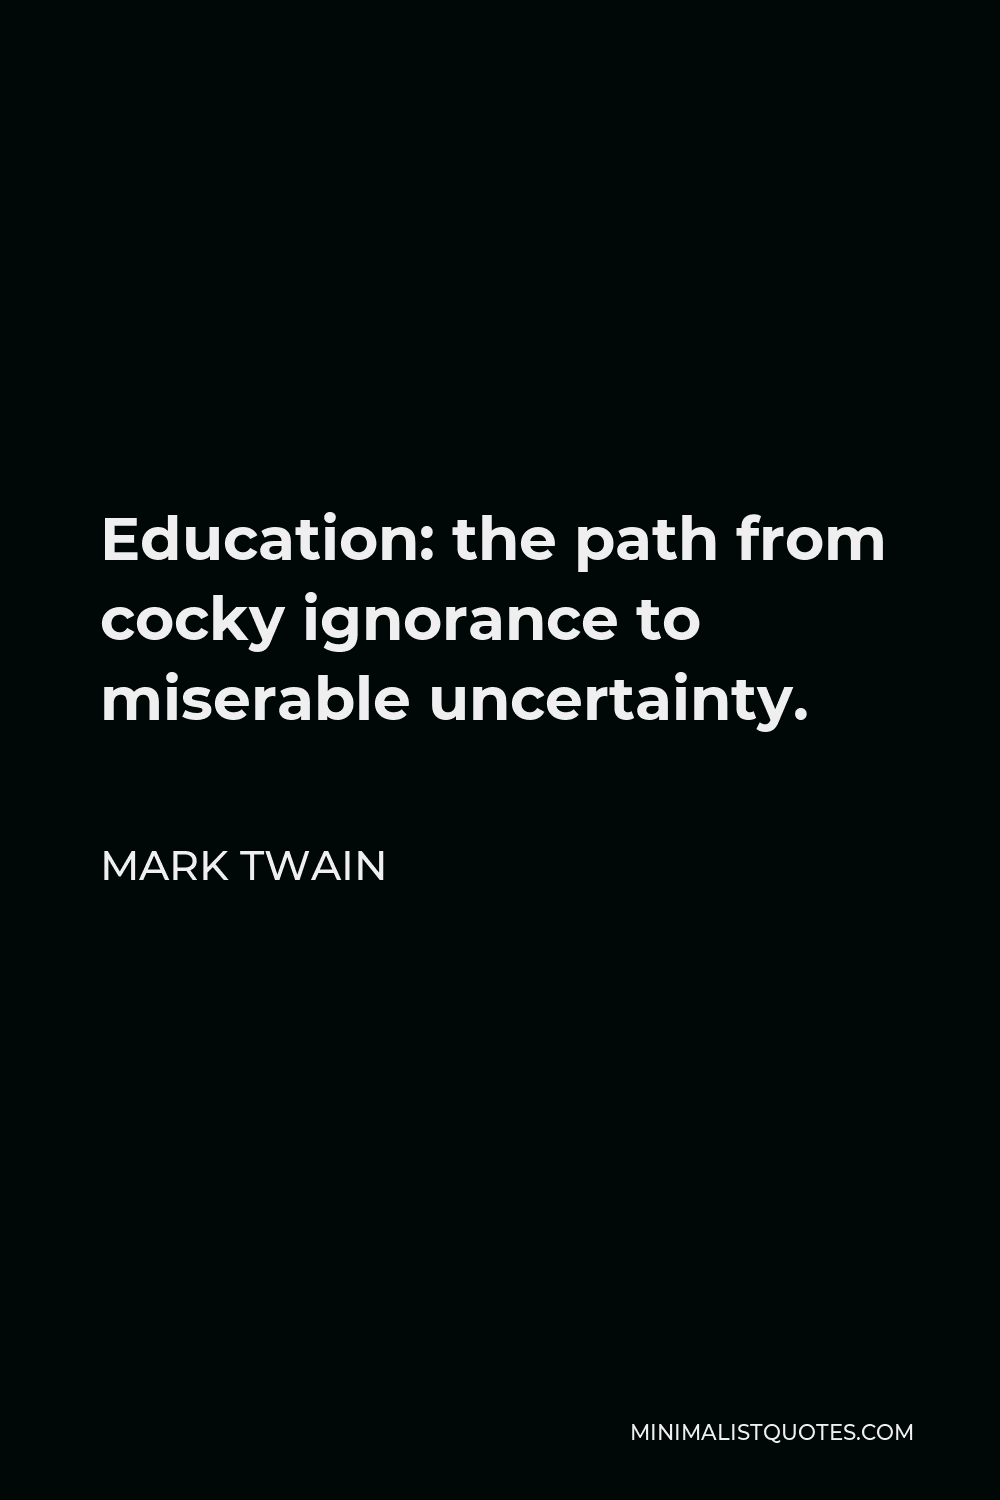 Mark Twain Quote - Education: the path from cocky ignorance to miserable uncertainty.